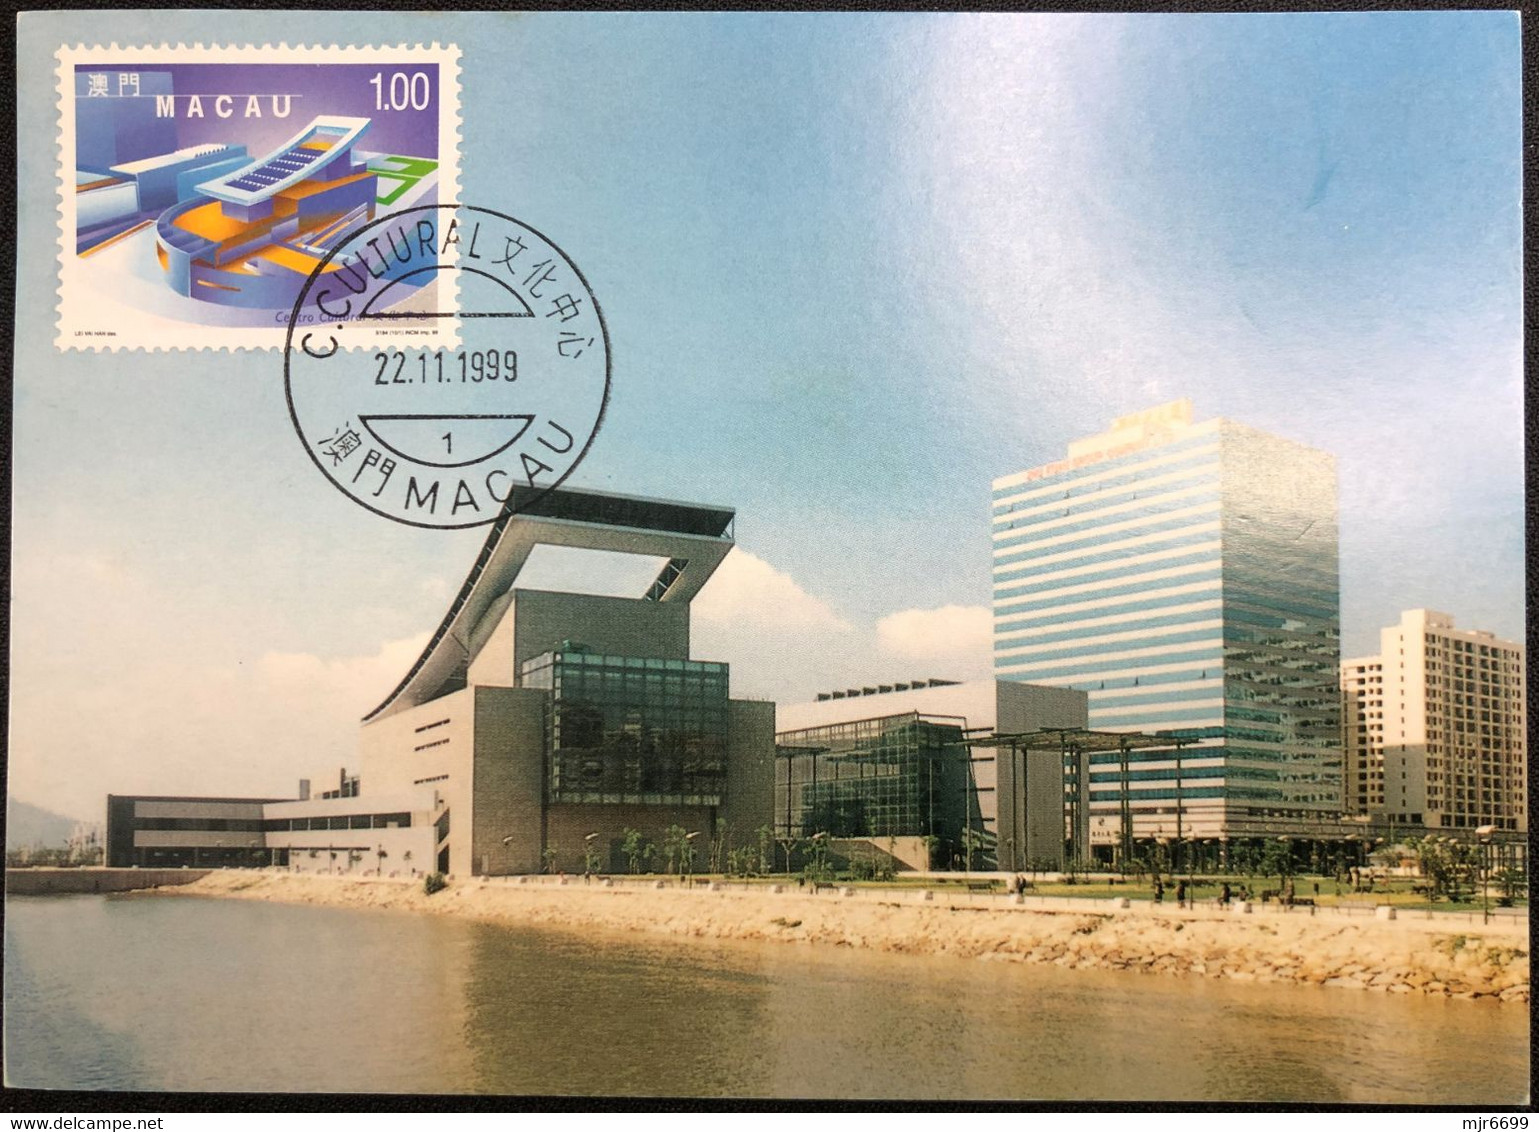 MACAU 1999 CULTURAL CENTRE MAX CARD (FIRST DAY WORK OF THE POST OFFICE IN THIS CENTRE) - Maximum Cards